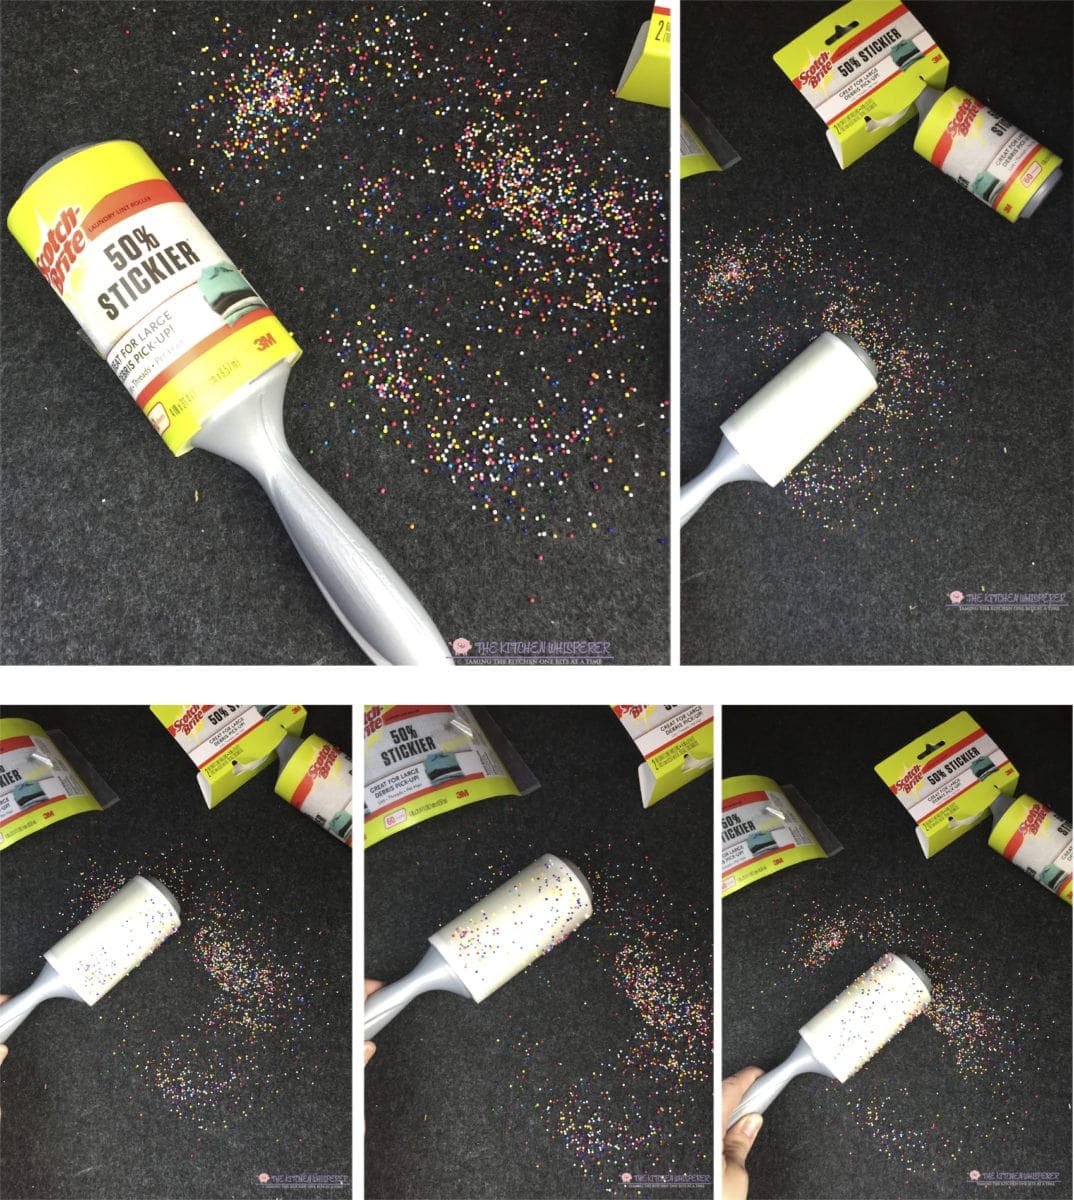 tkw-sprinkle-clean-up-collage1